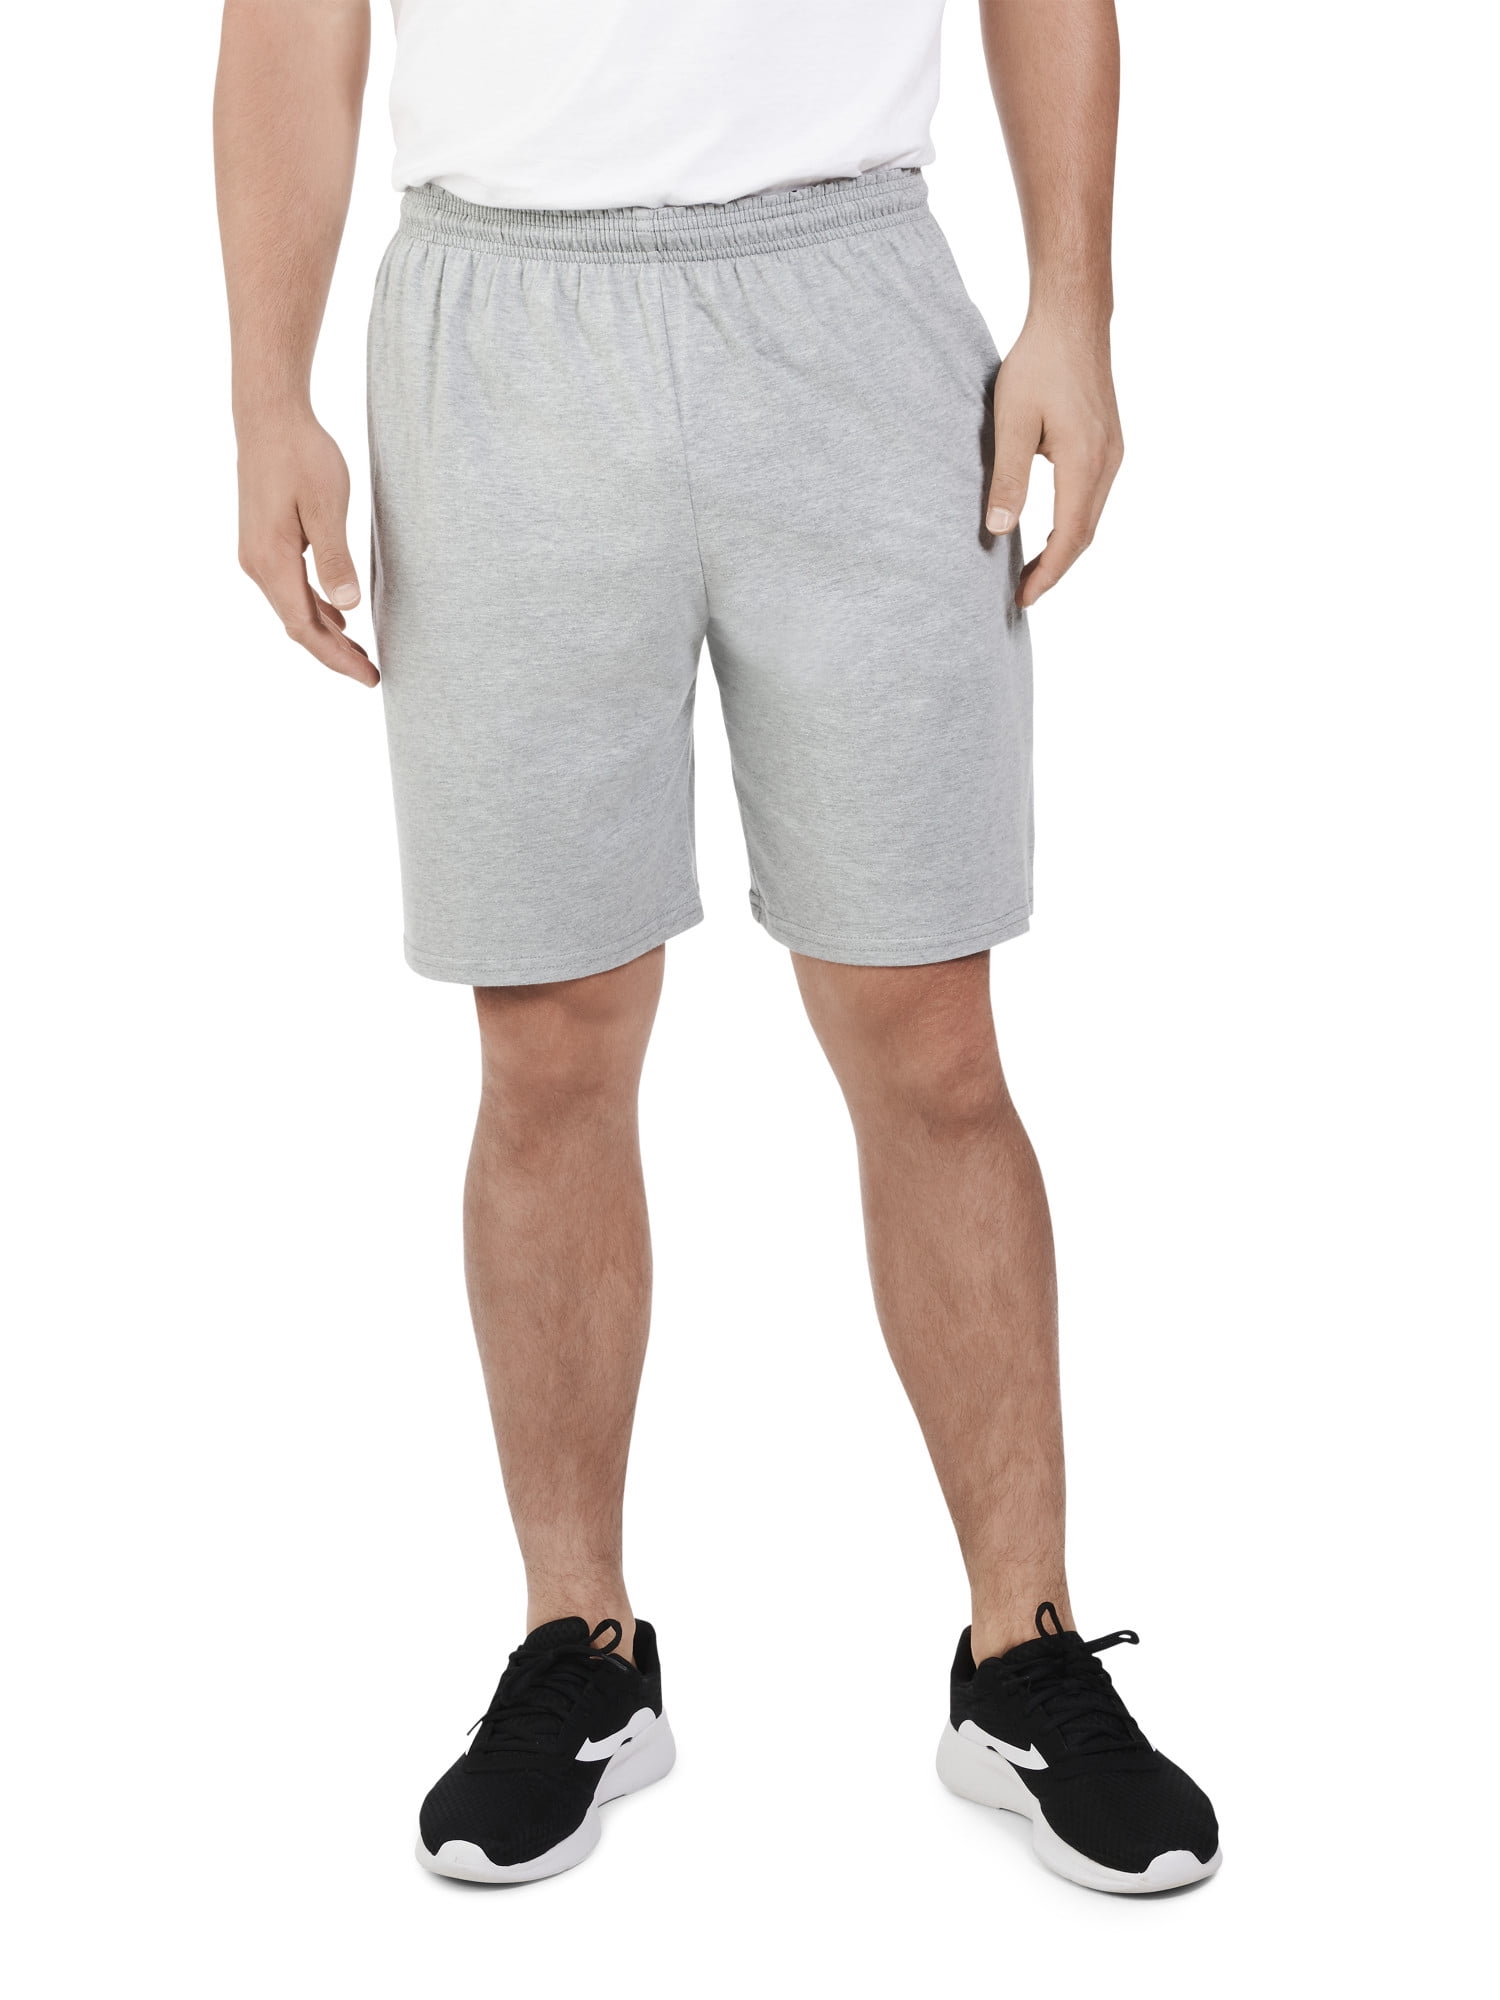 Dual Defense Jersey Short with Pockets 